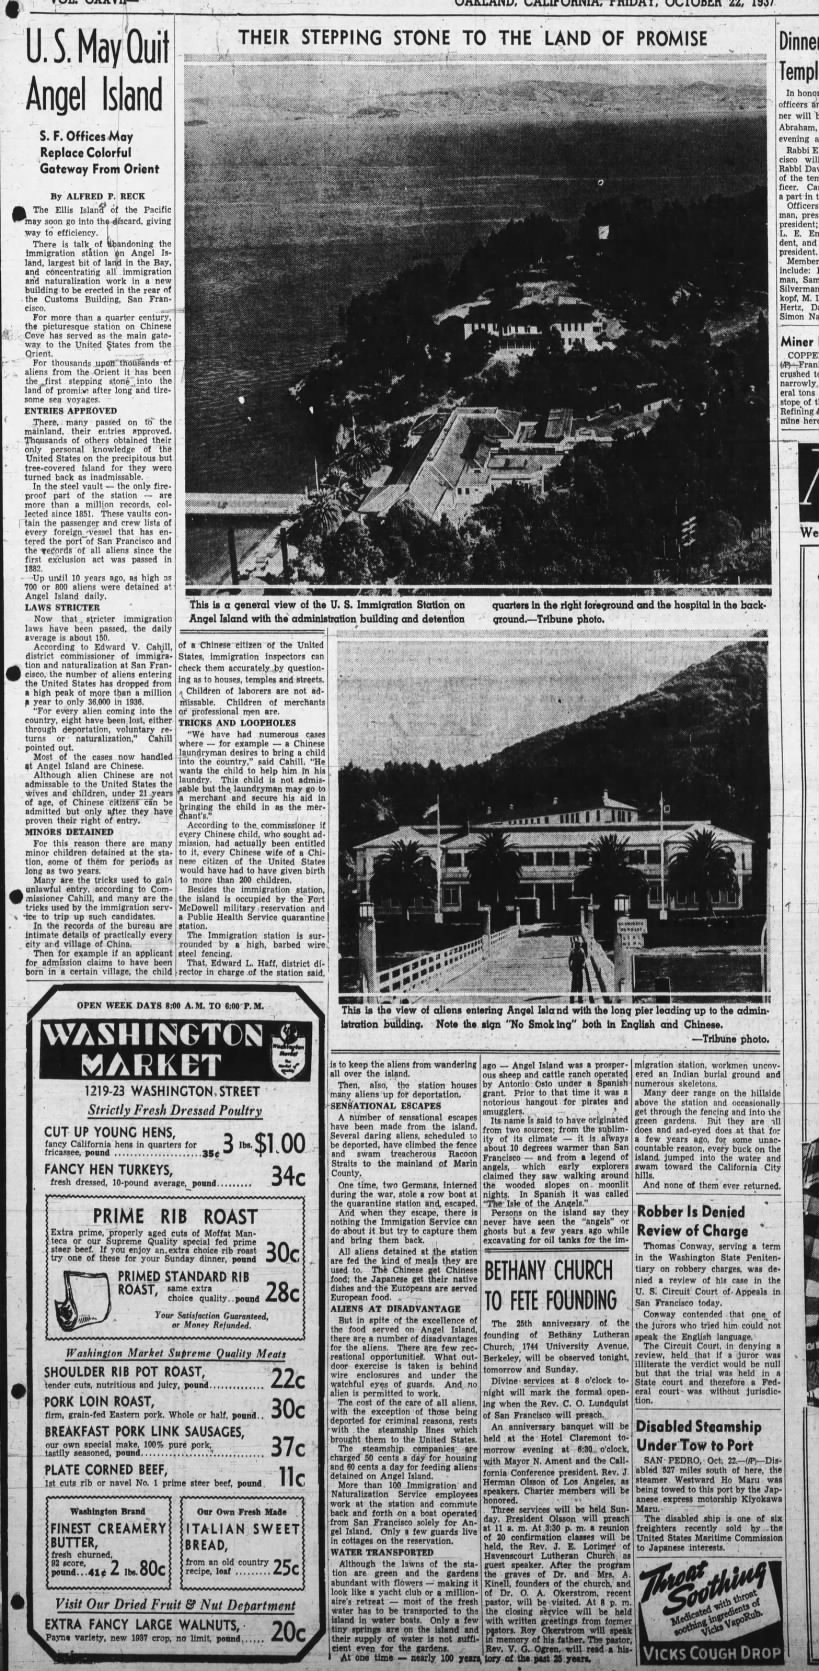 United States may close Angel Island in favor of a mainland immigration center, 1937